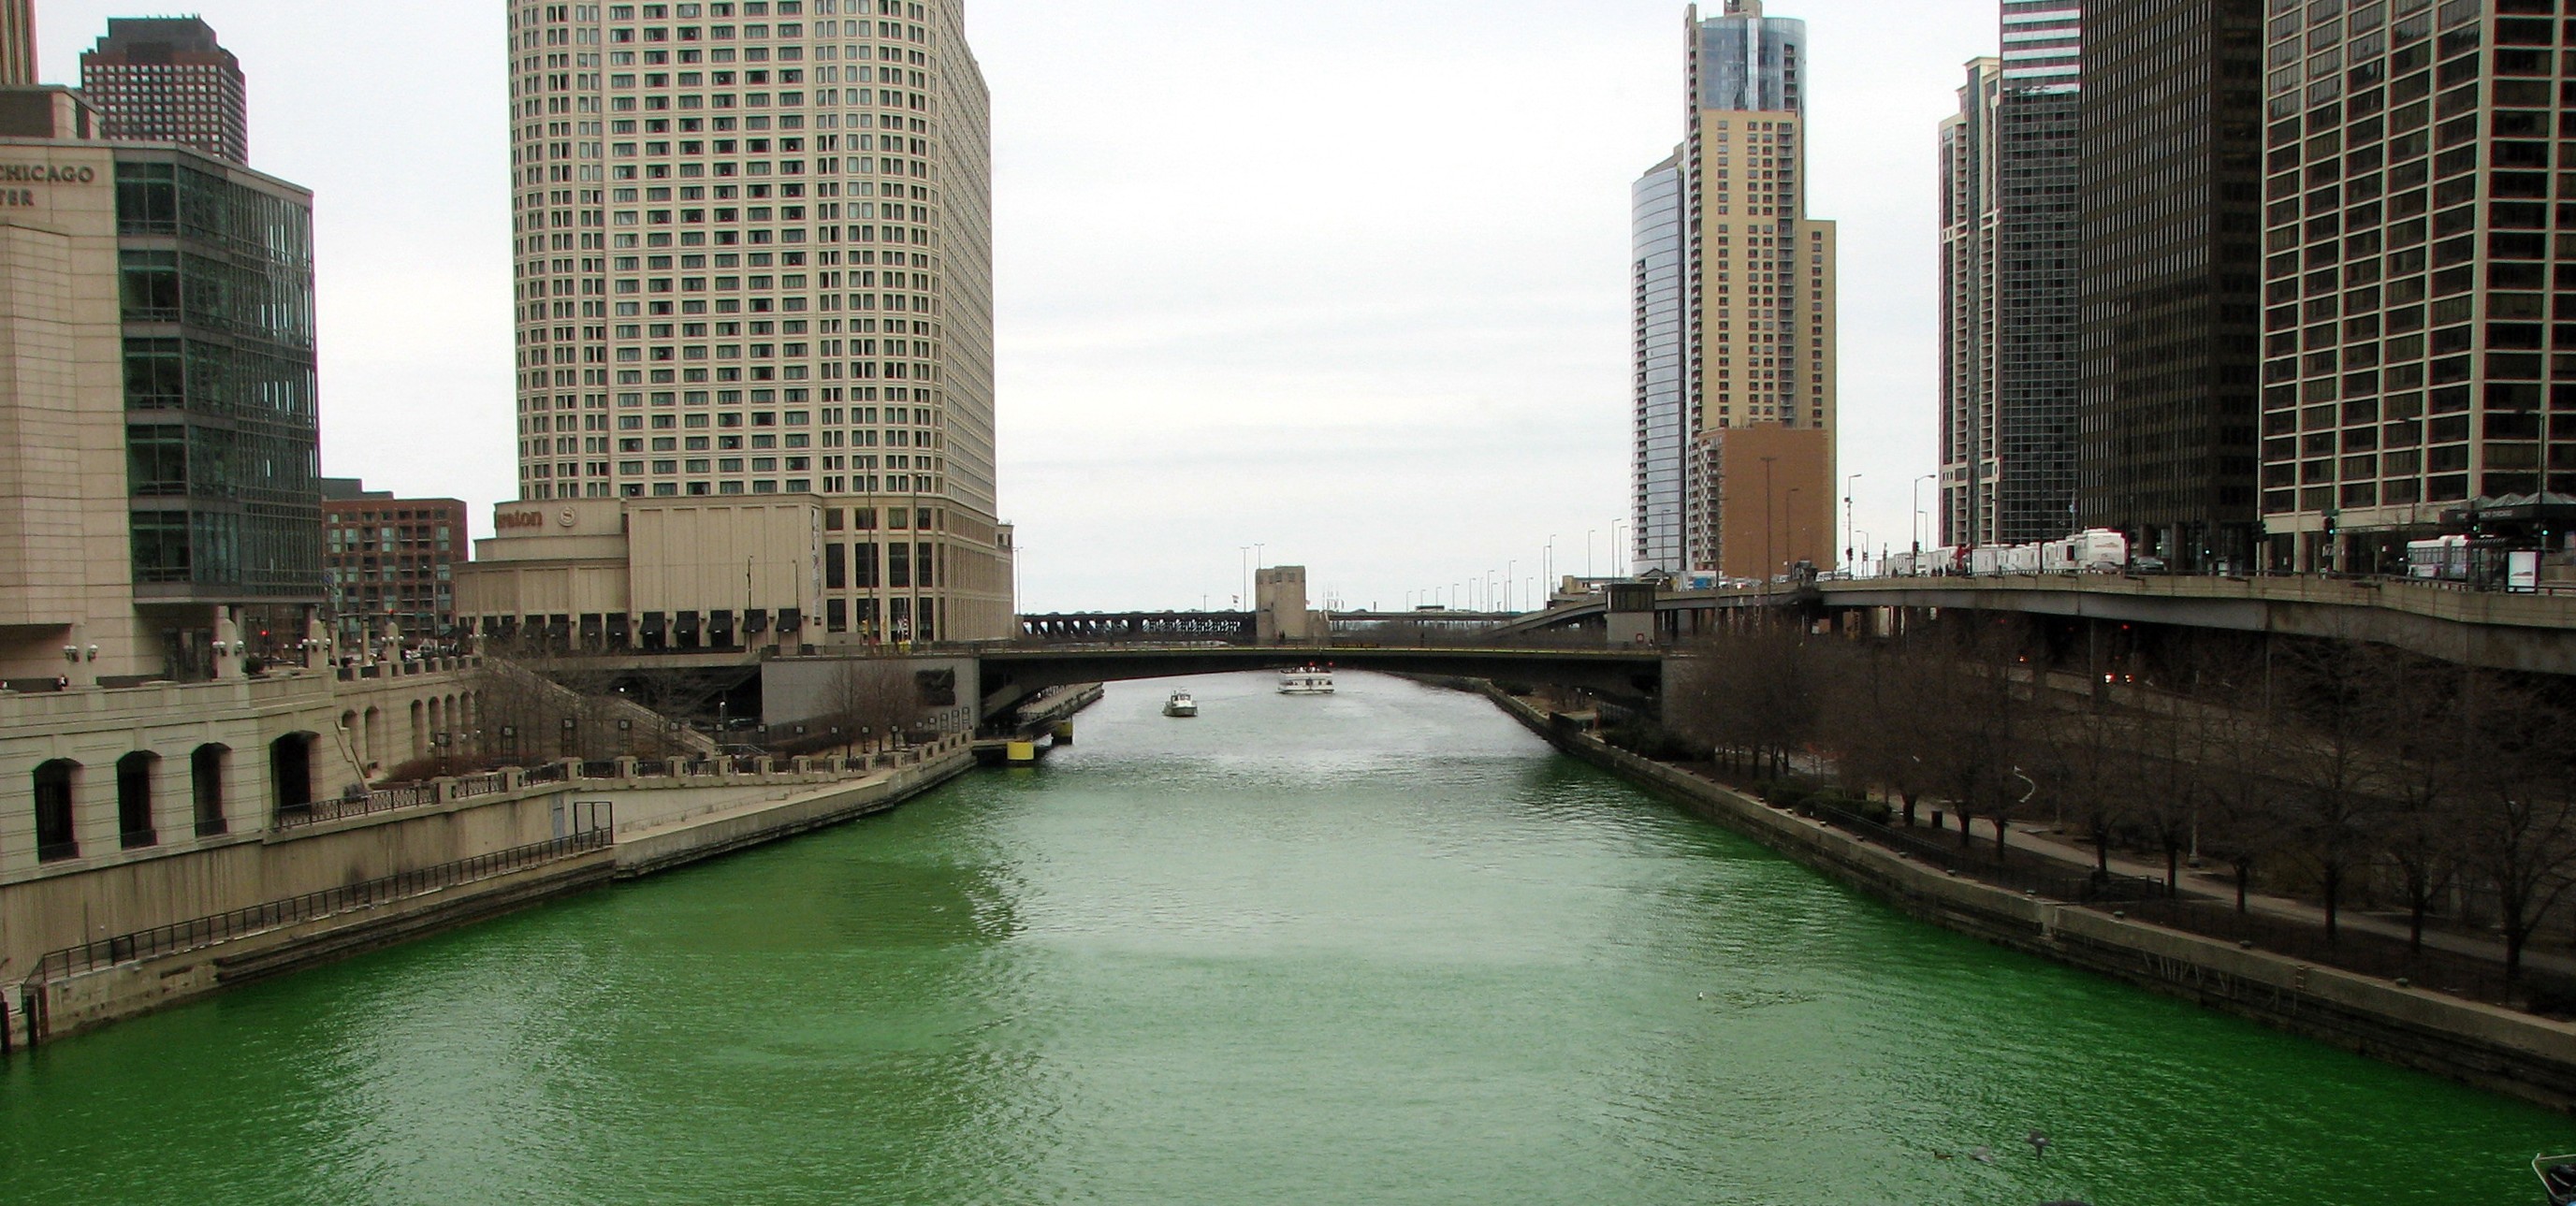 Water could turn green like the Chicago River